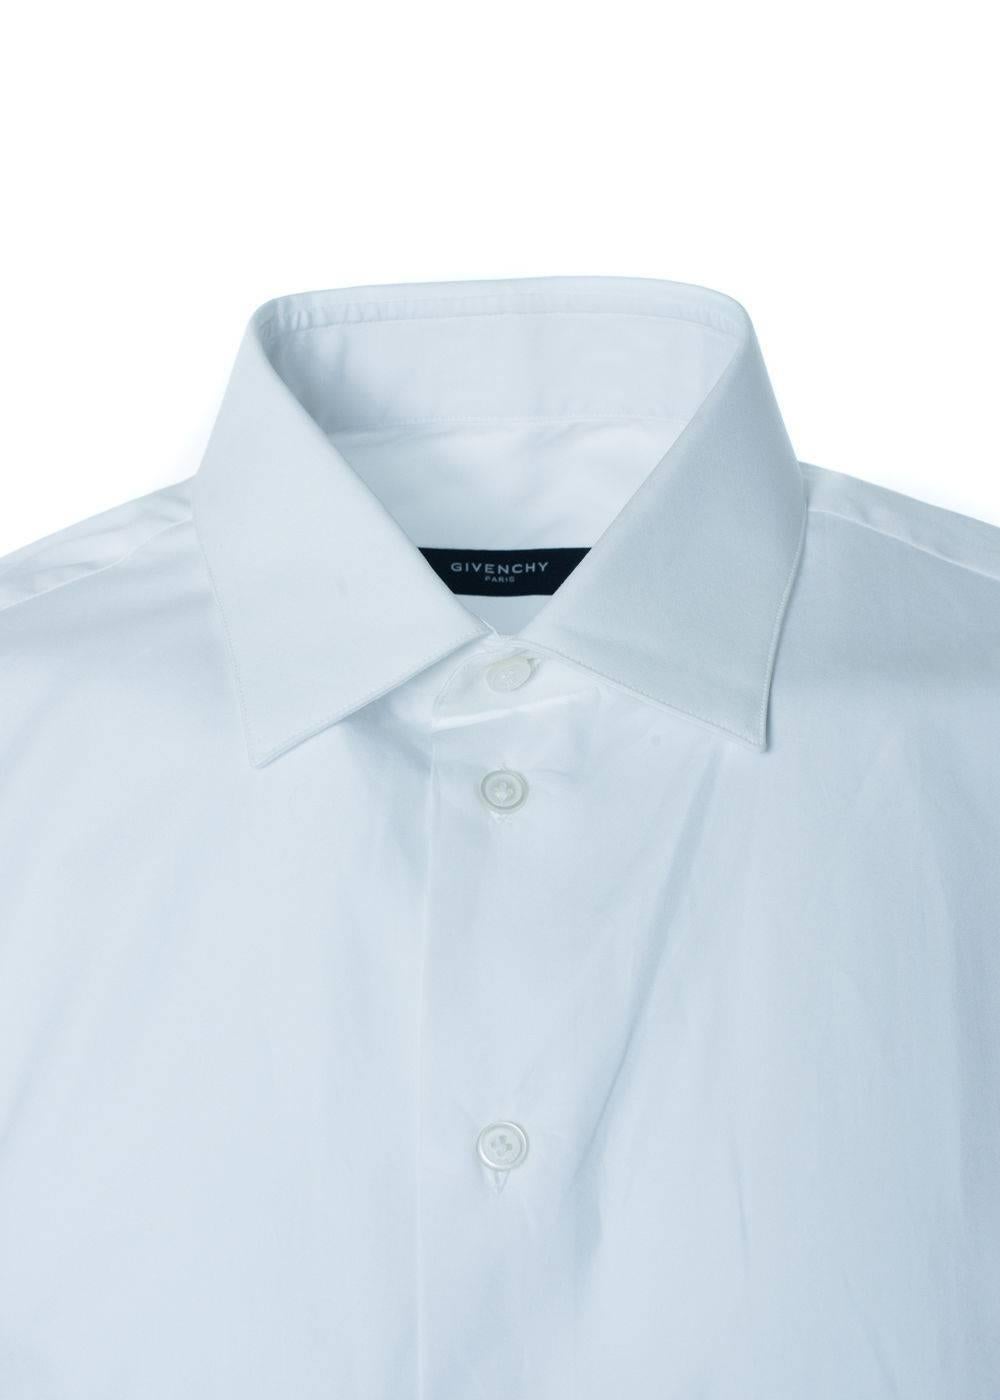 Brand New Givenchy Men's Button Down 
Original Tags
Retails in Stores & Online for $350
Men's Size E45 (S) Fits True to Size

Every man needs a classic white button down for those professional settings or dressy outings. This Givenchy button down is